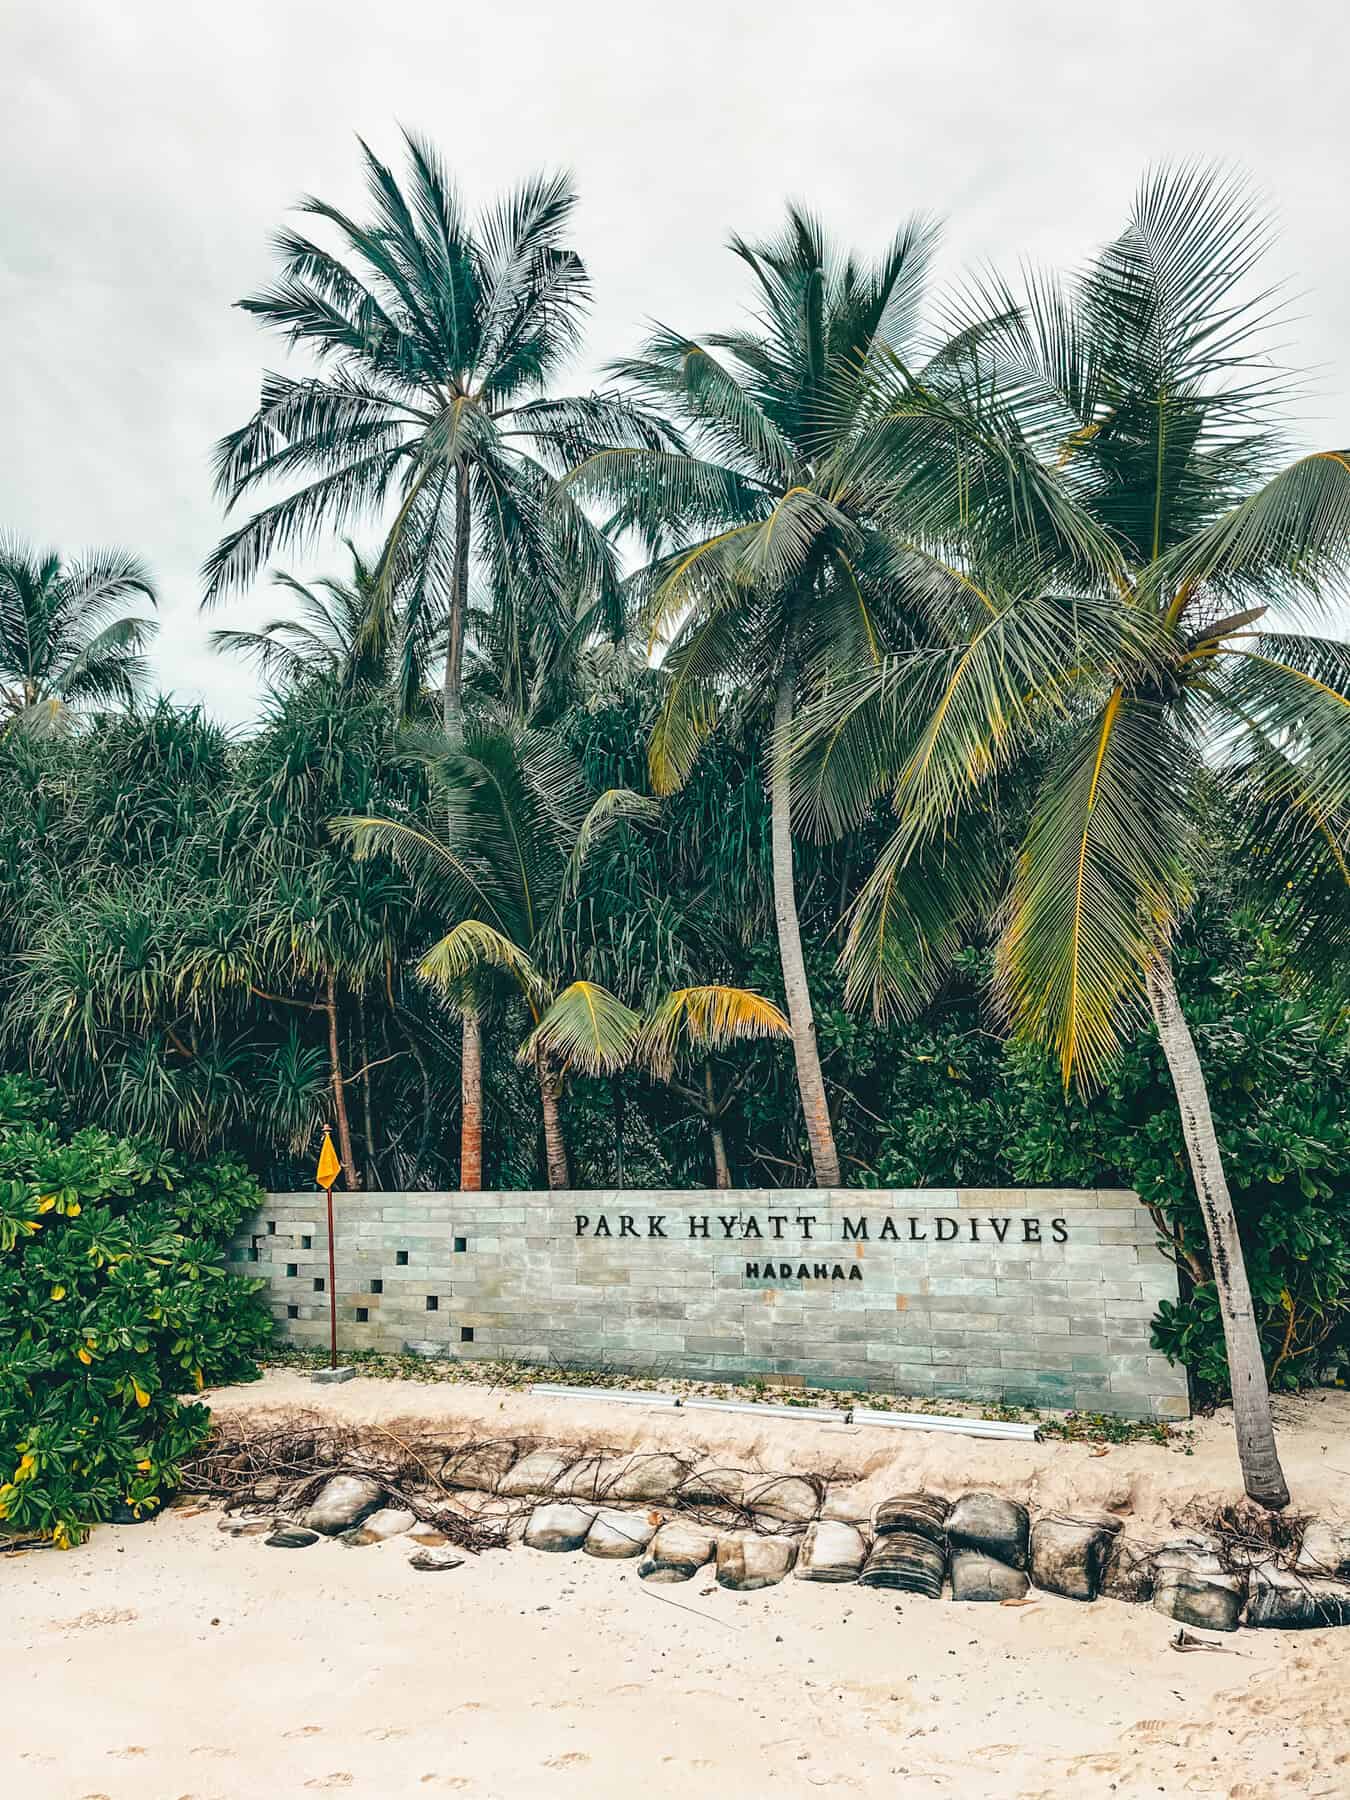 Entrance sign of Park Hyatt Maldives Hadahaa set against a lush background of palm trees on a sandy beach. The sign, built into a low stone wall, is surrounded by vibrant green foliage under a cloudy sky, embodying a tropical and welcoming atmosphere